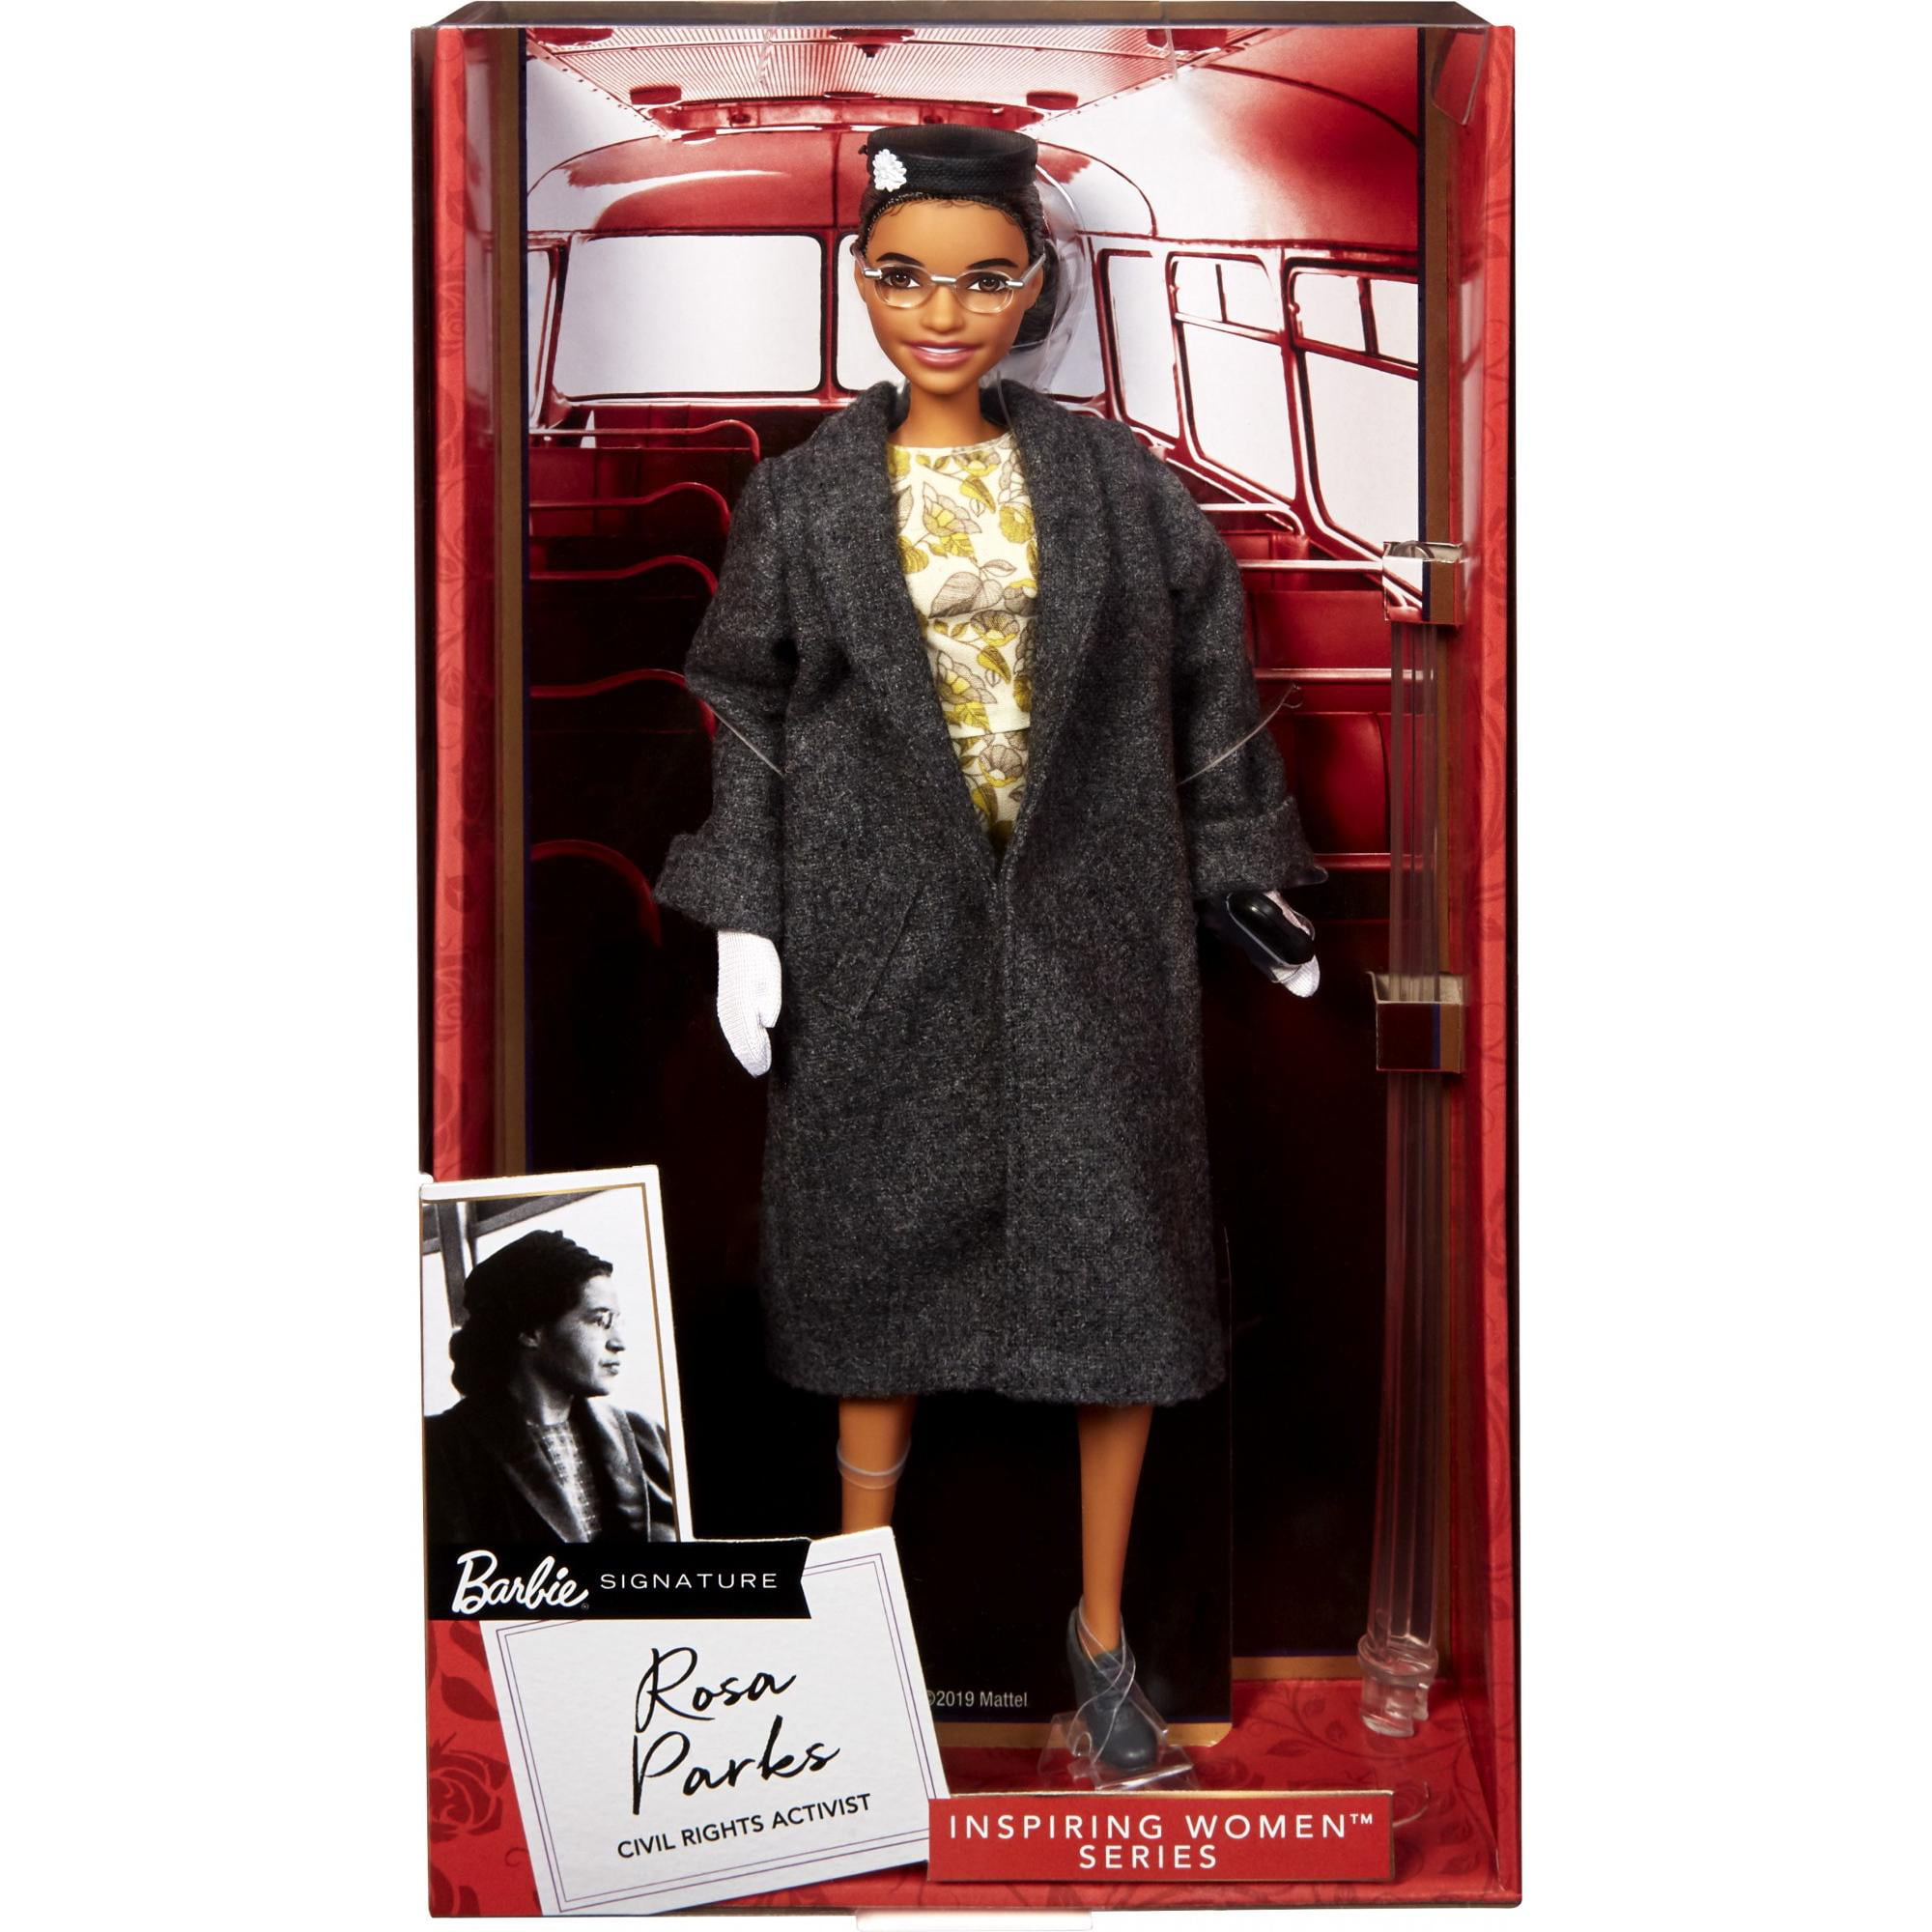 where to buy rosa parks barbie doll